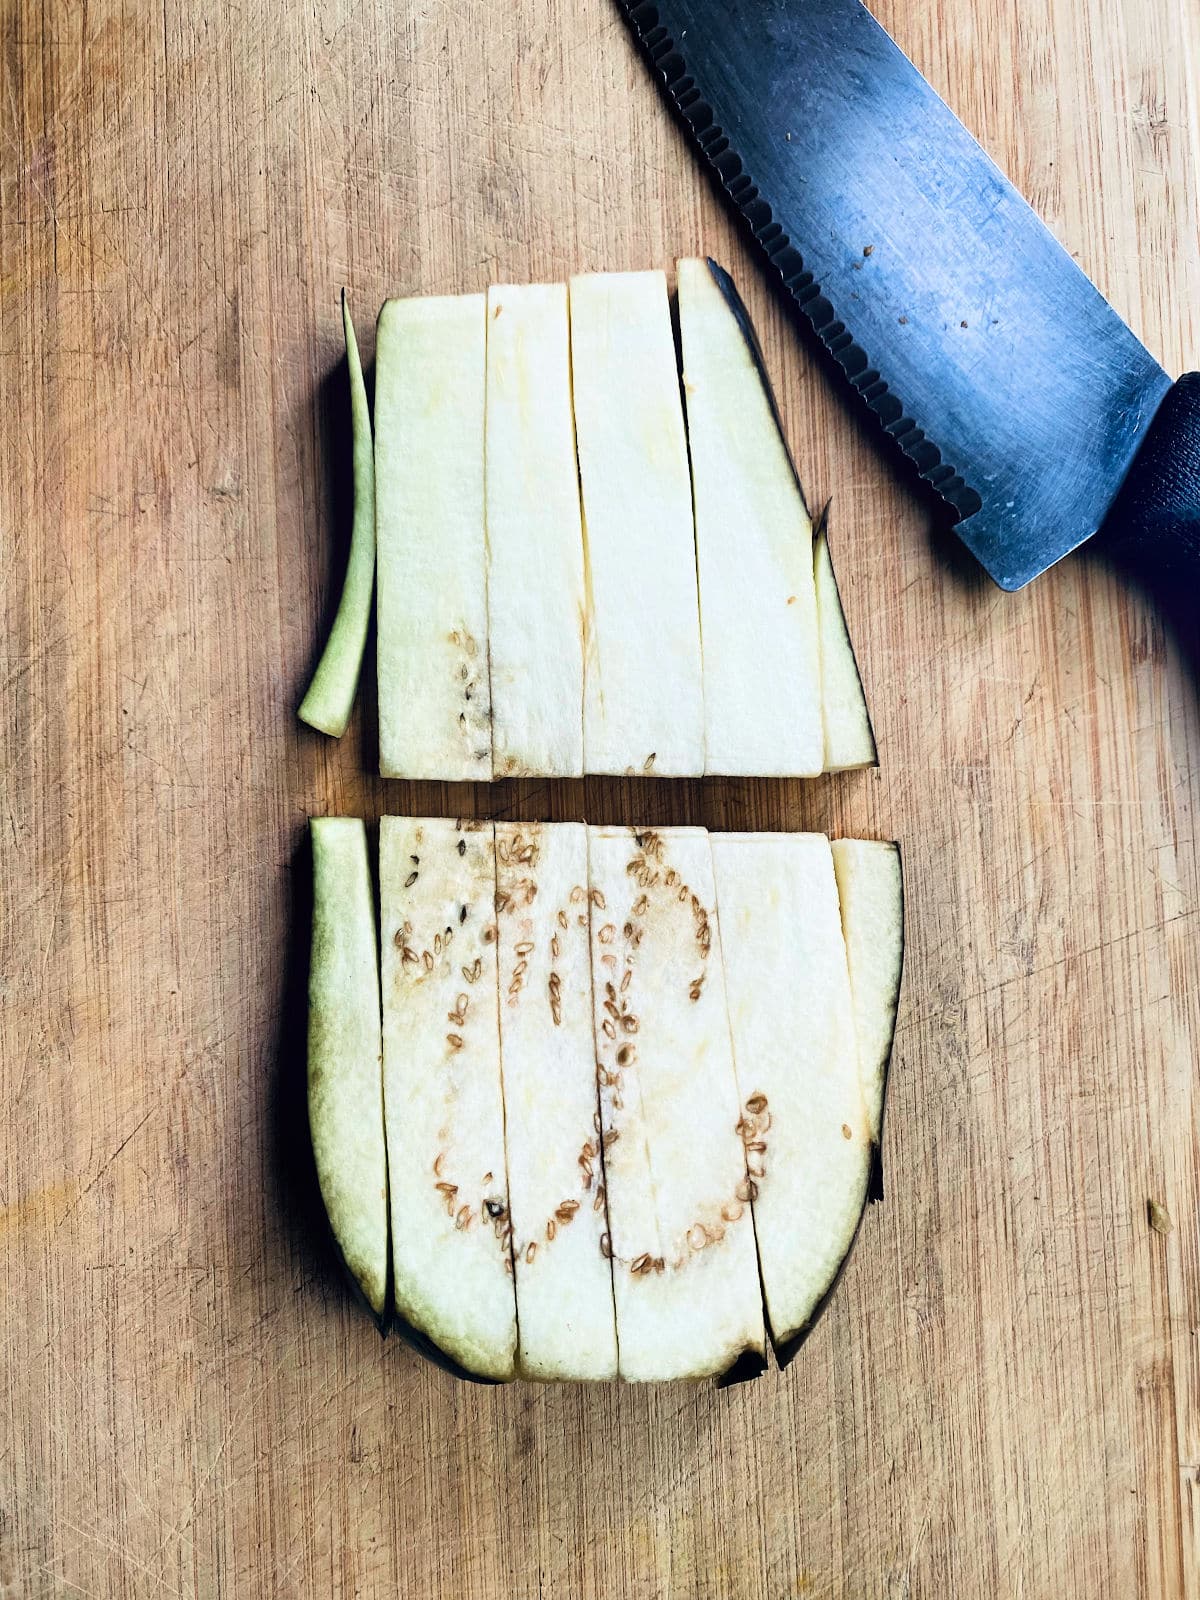 A slice of eggplant cut into french fry shape